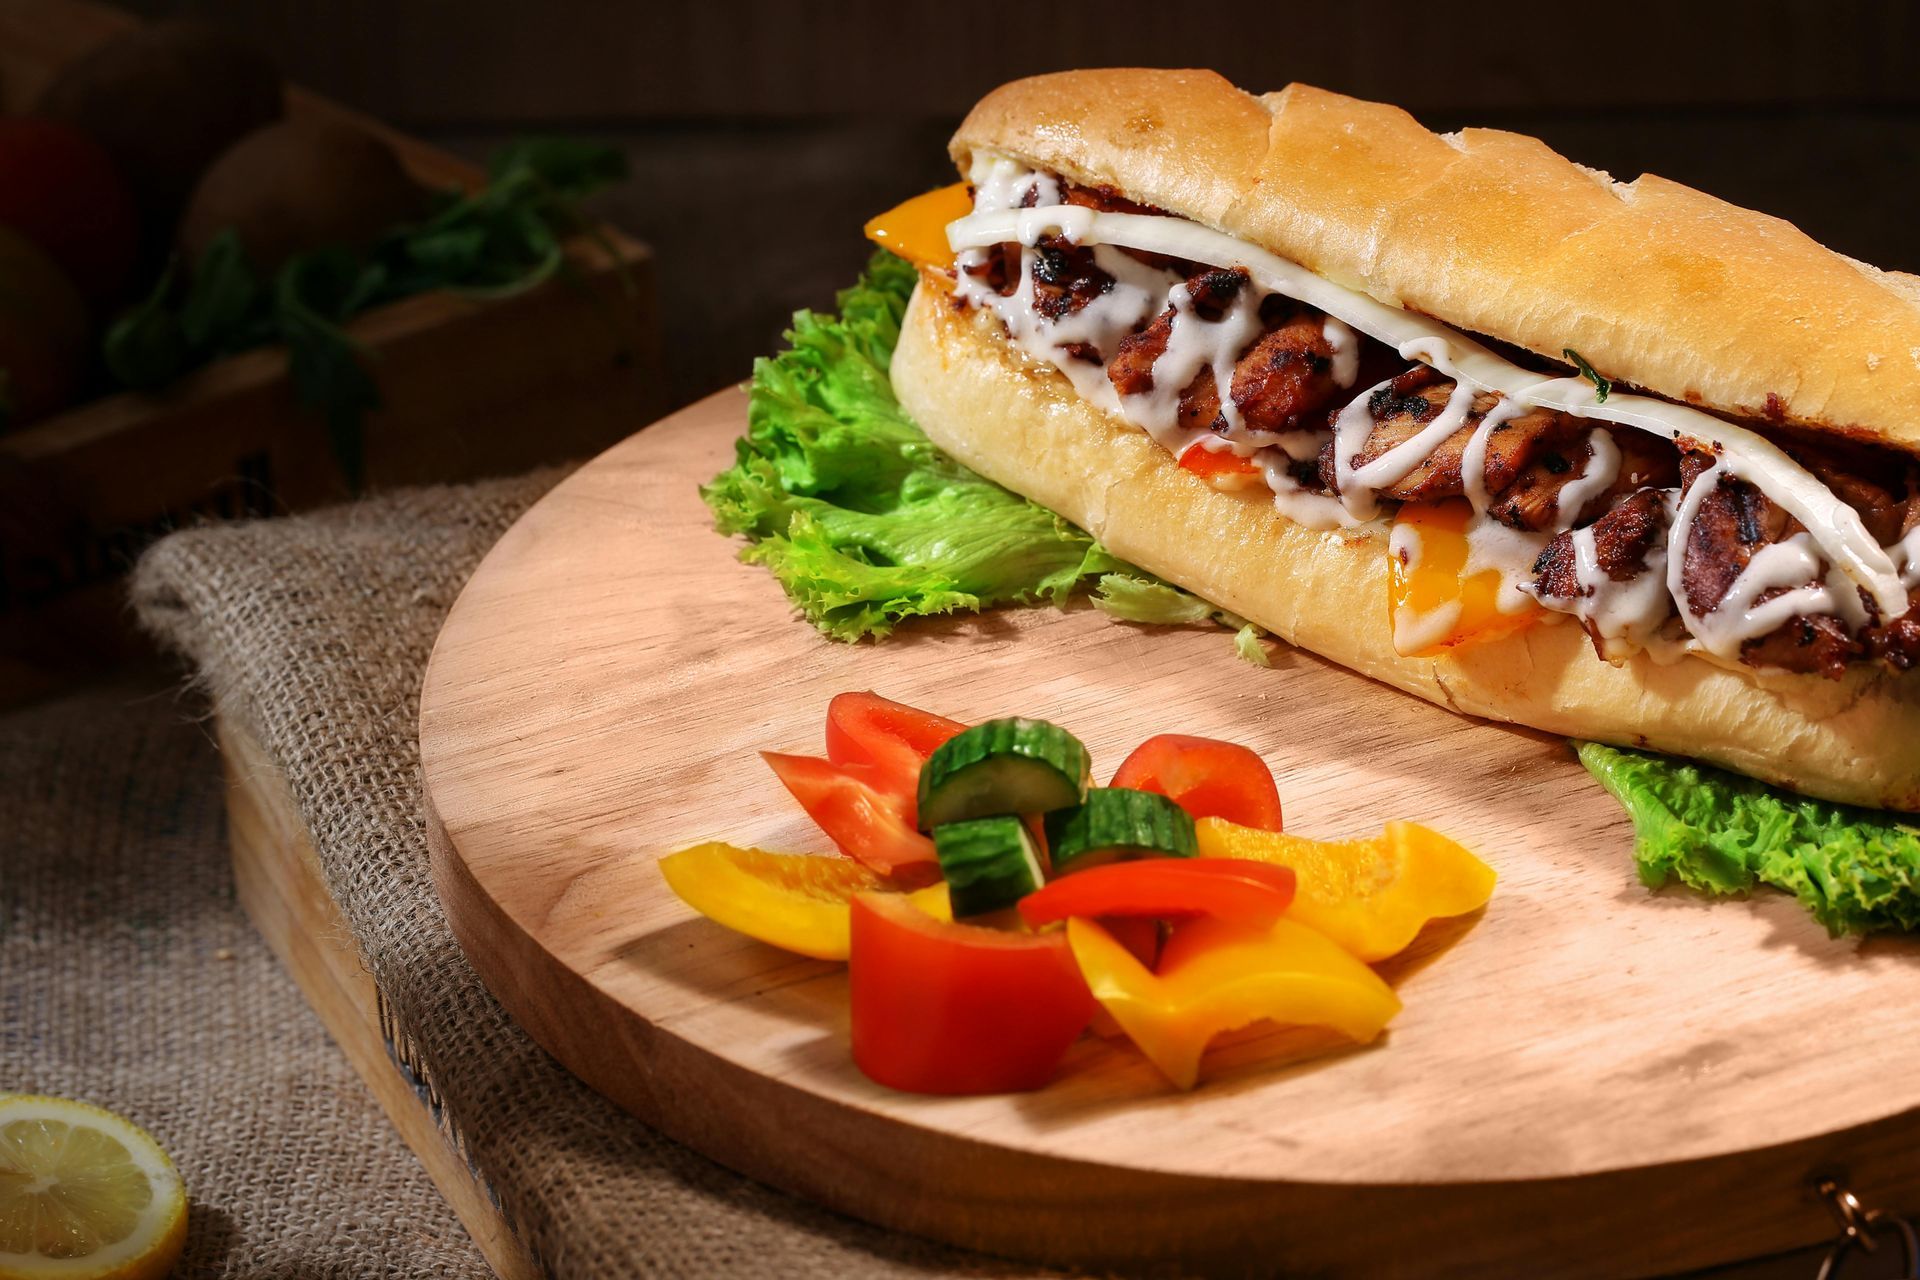 A sub sandwich is sitting on a wooden cutting board with vegetables.